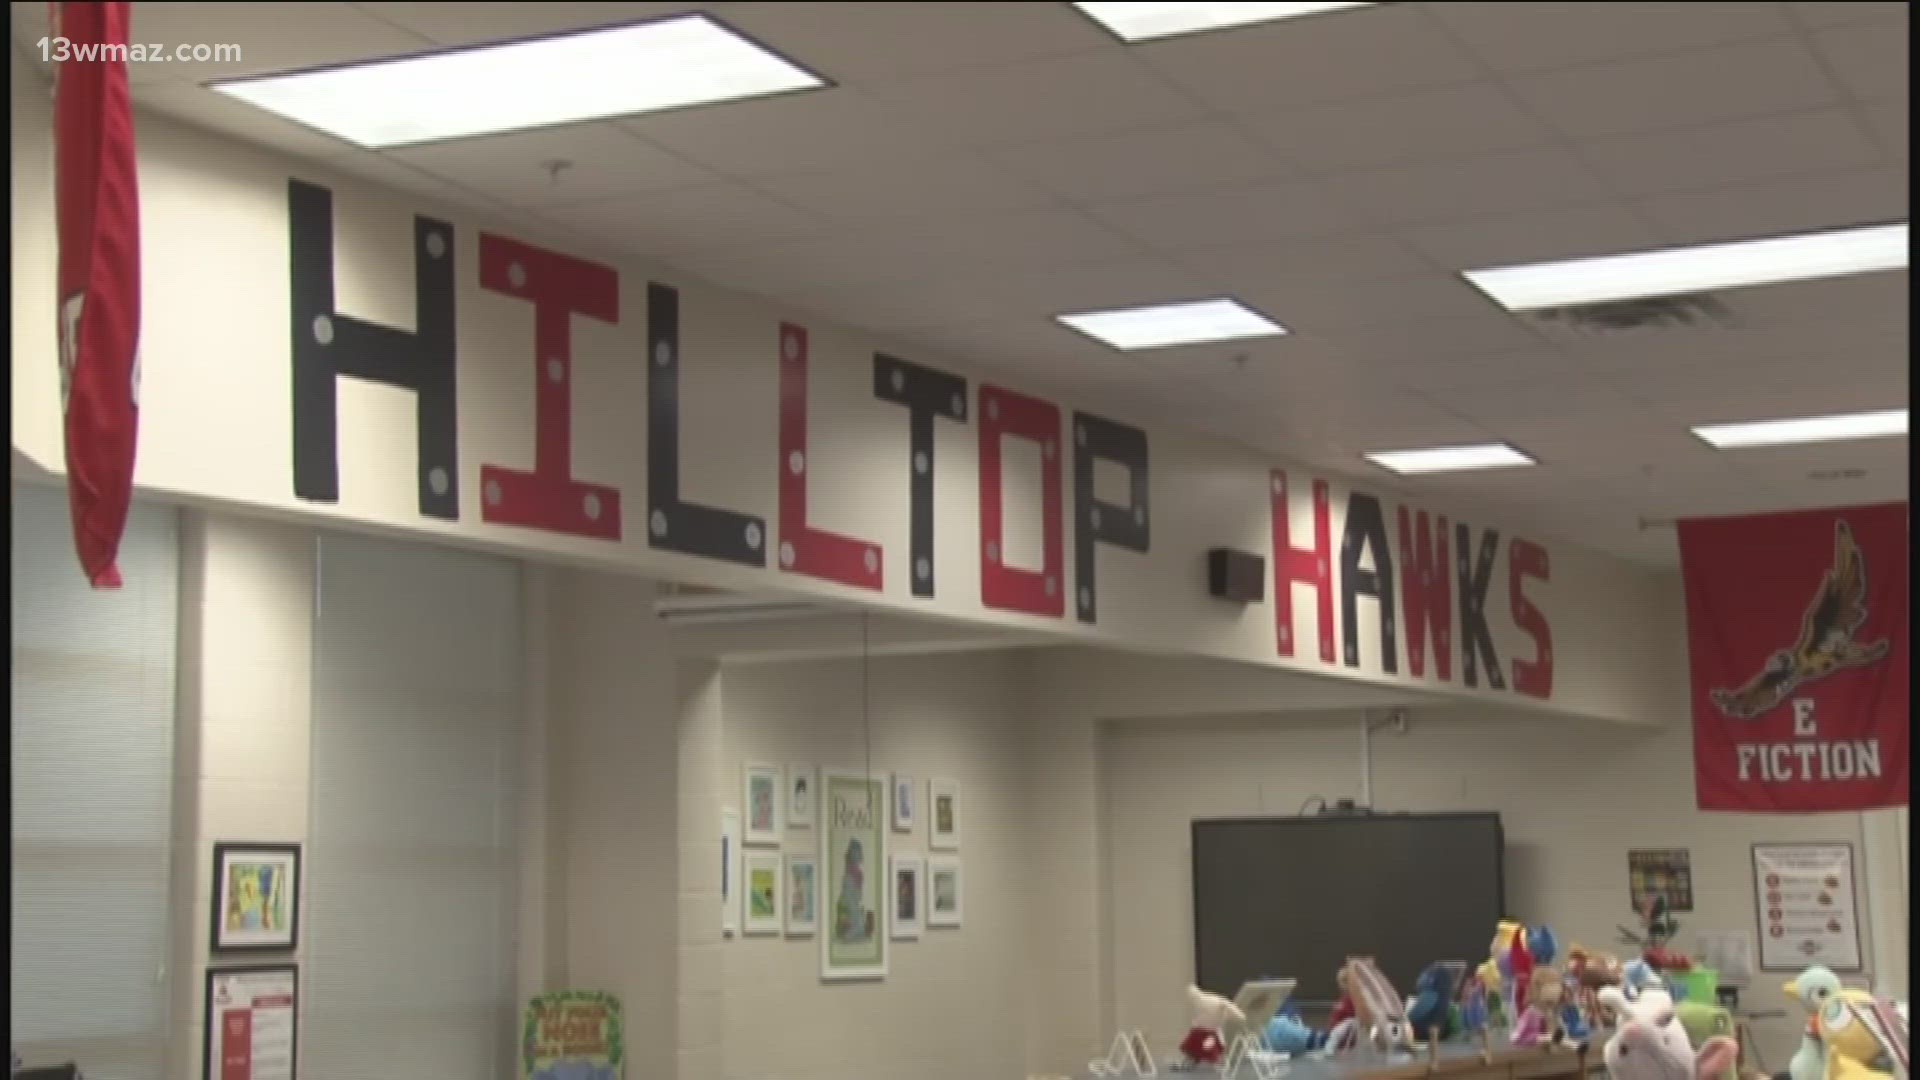 Hilltop Elementary has implemented a fun initiative to promote reading.